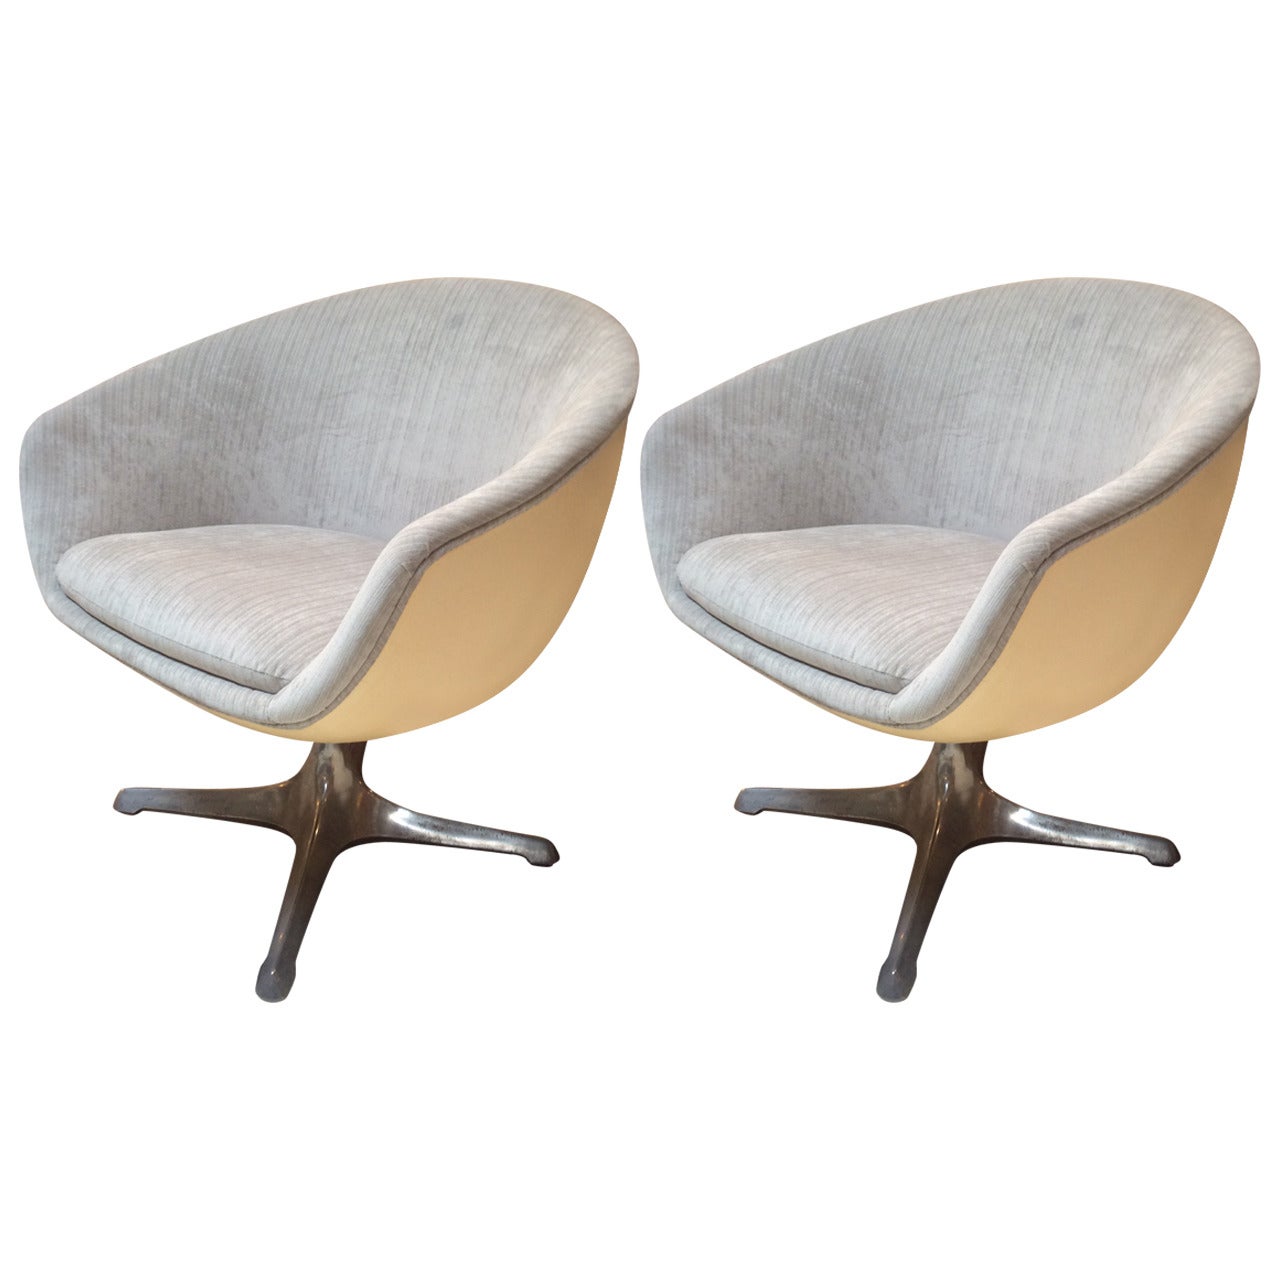 Pair of Mid Century Pod, Ball or Egg Swivel Chairs from the 1960s